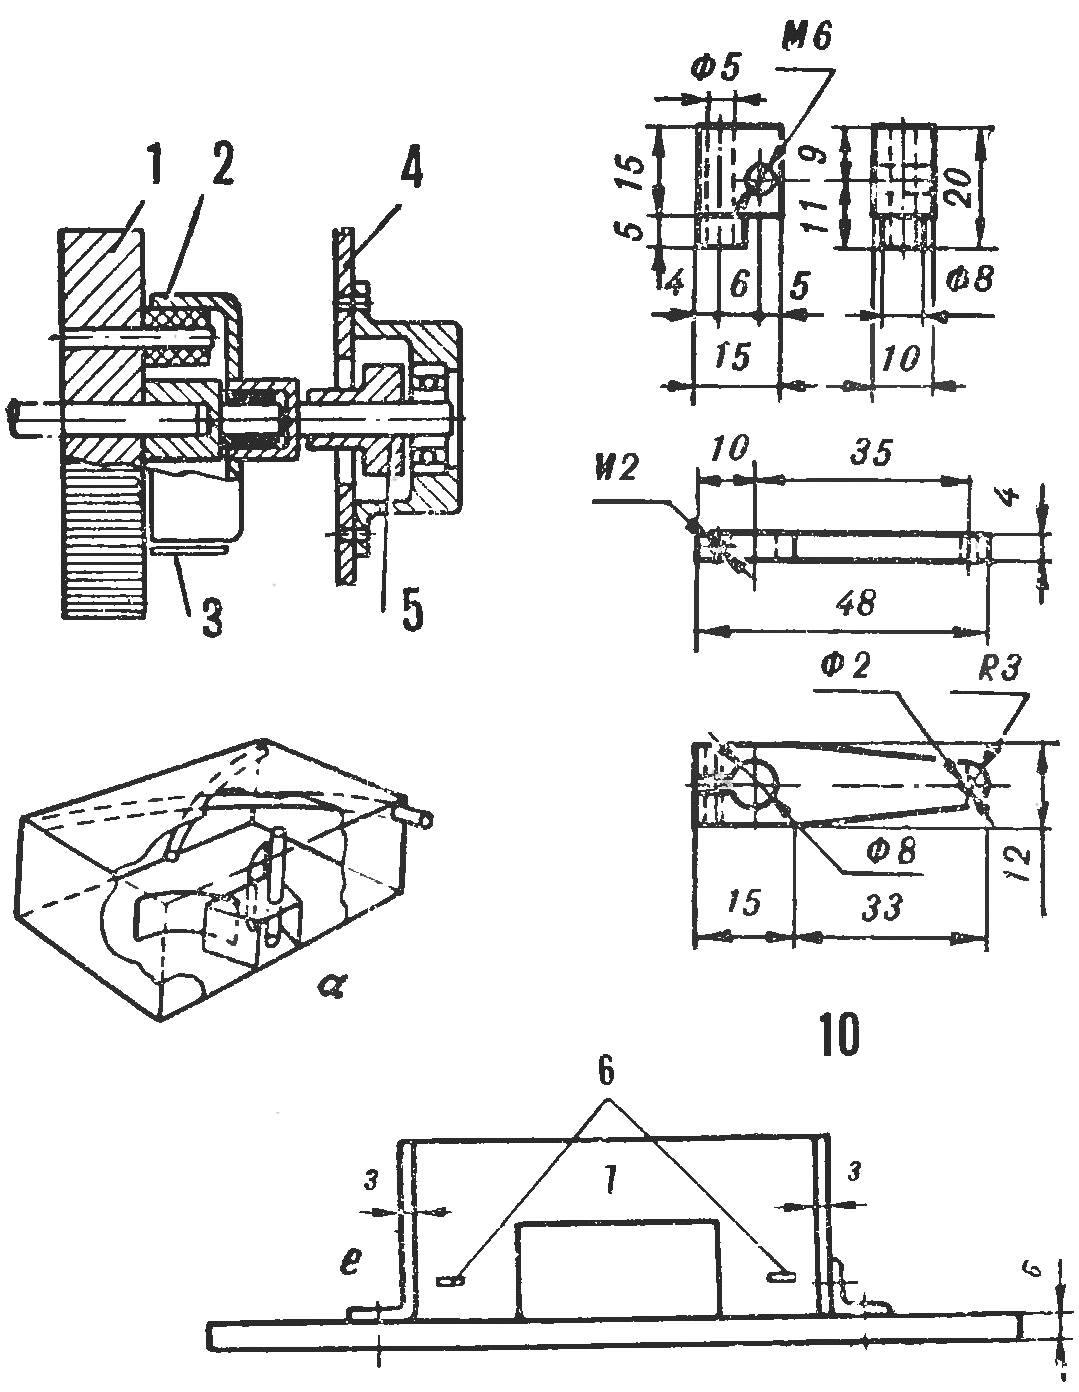 The composition of the model and the individual parts